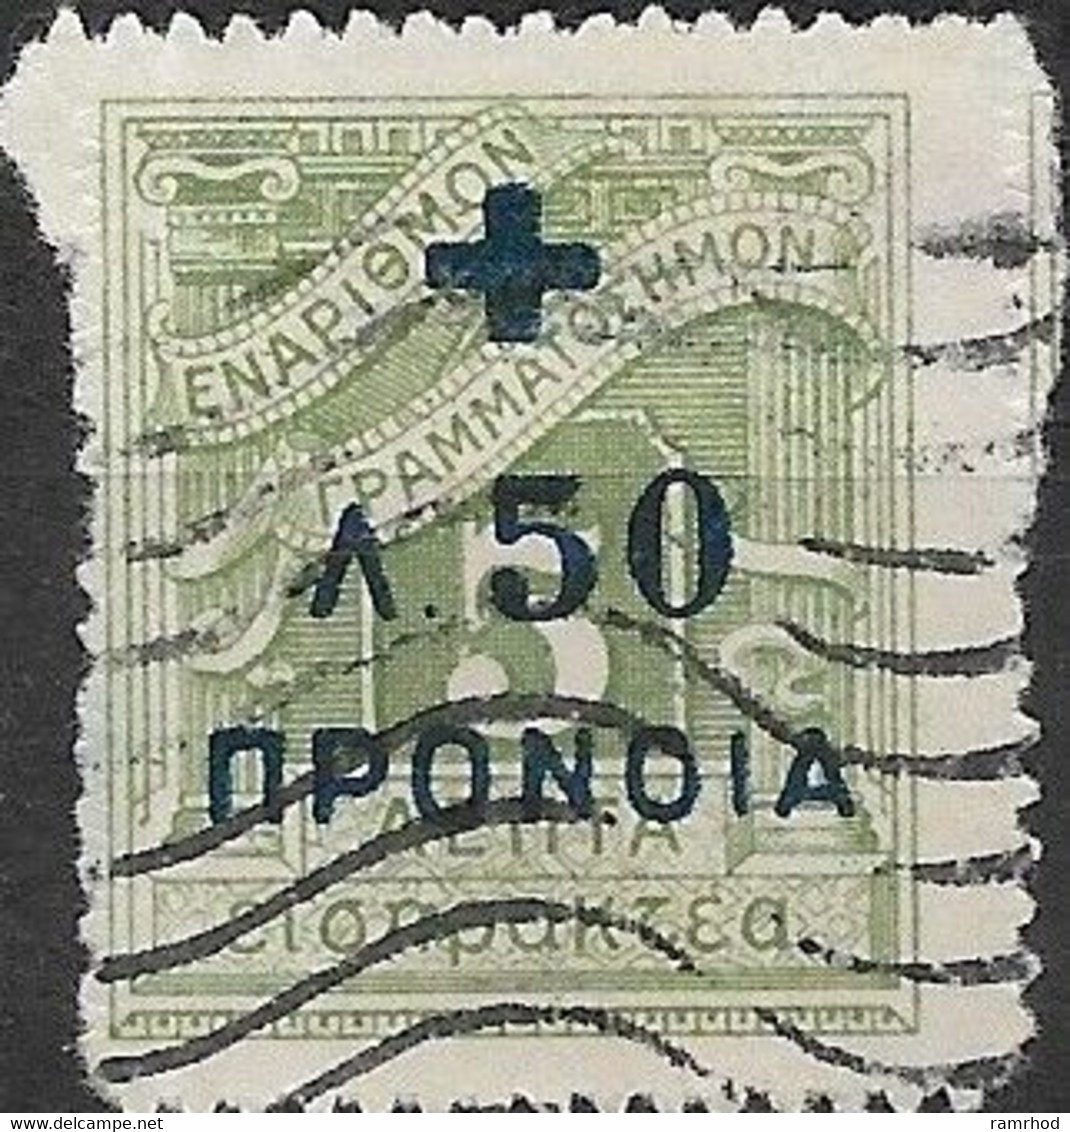 GREECE 1938 Charity Tax - Postage Due Surcharged - 50l. On 5l. - Green FU - Liefdadigheid